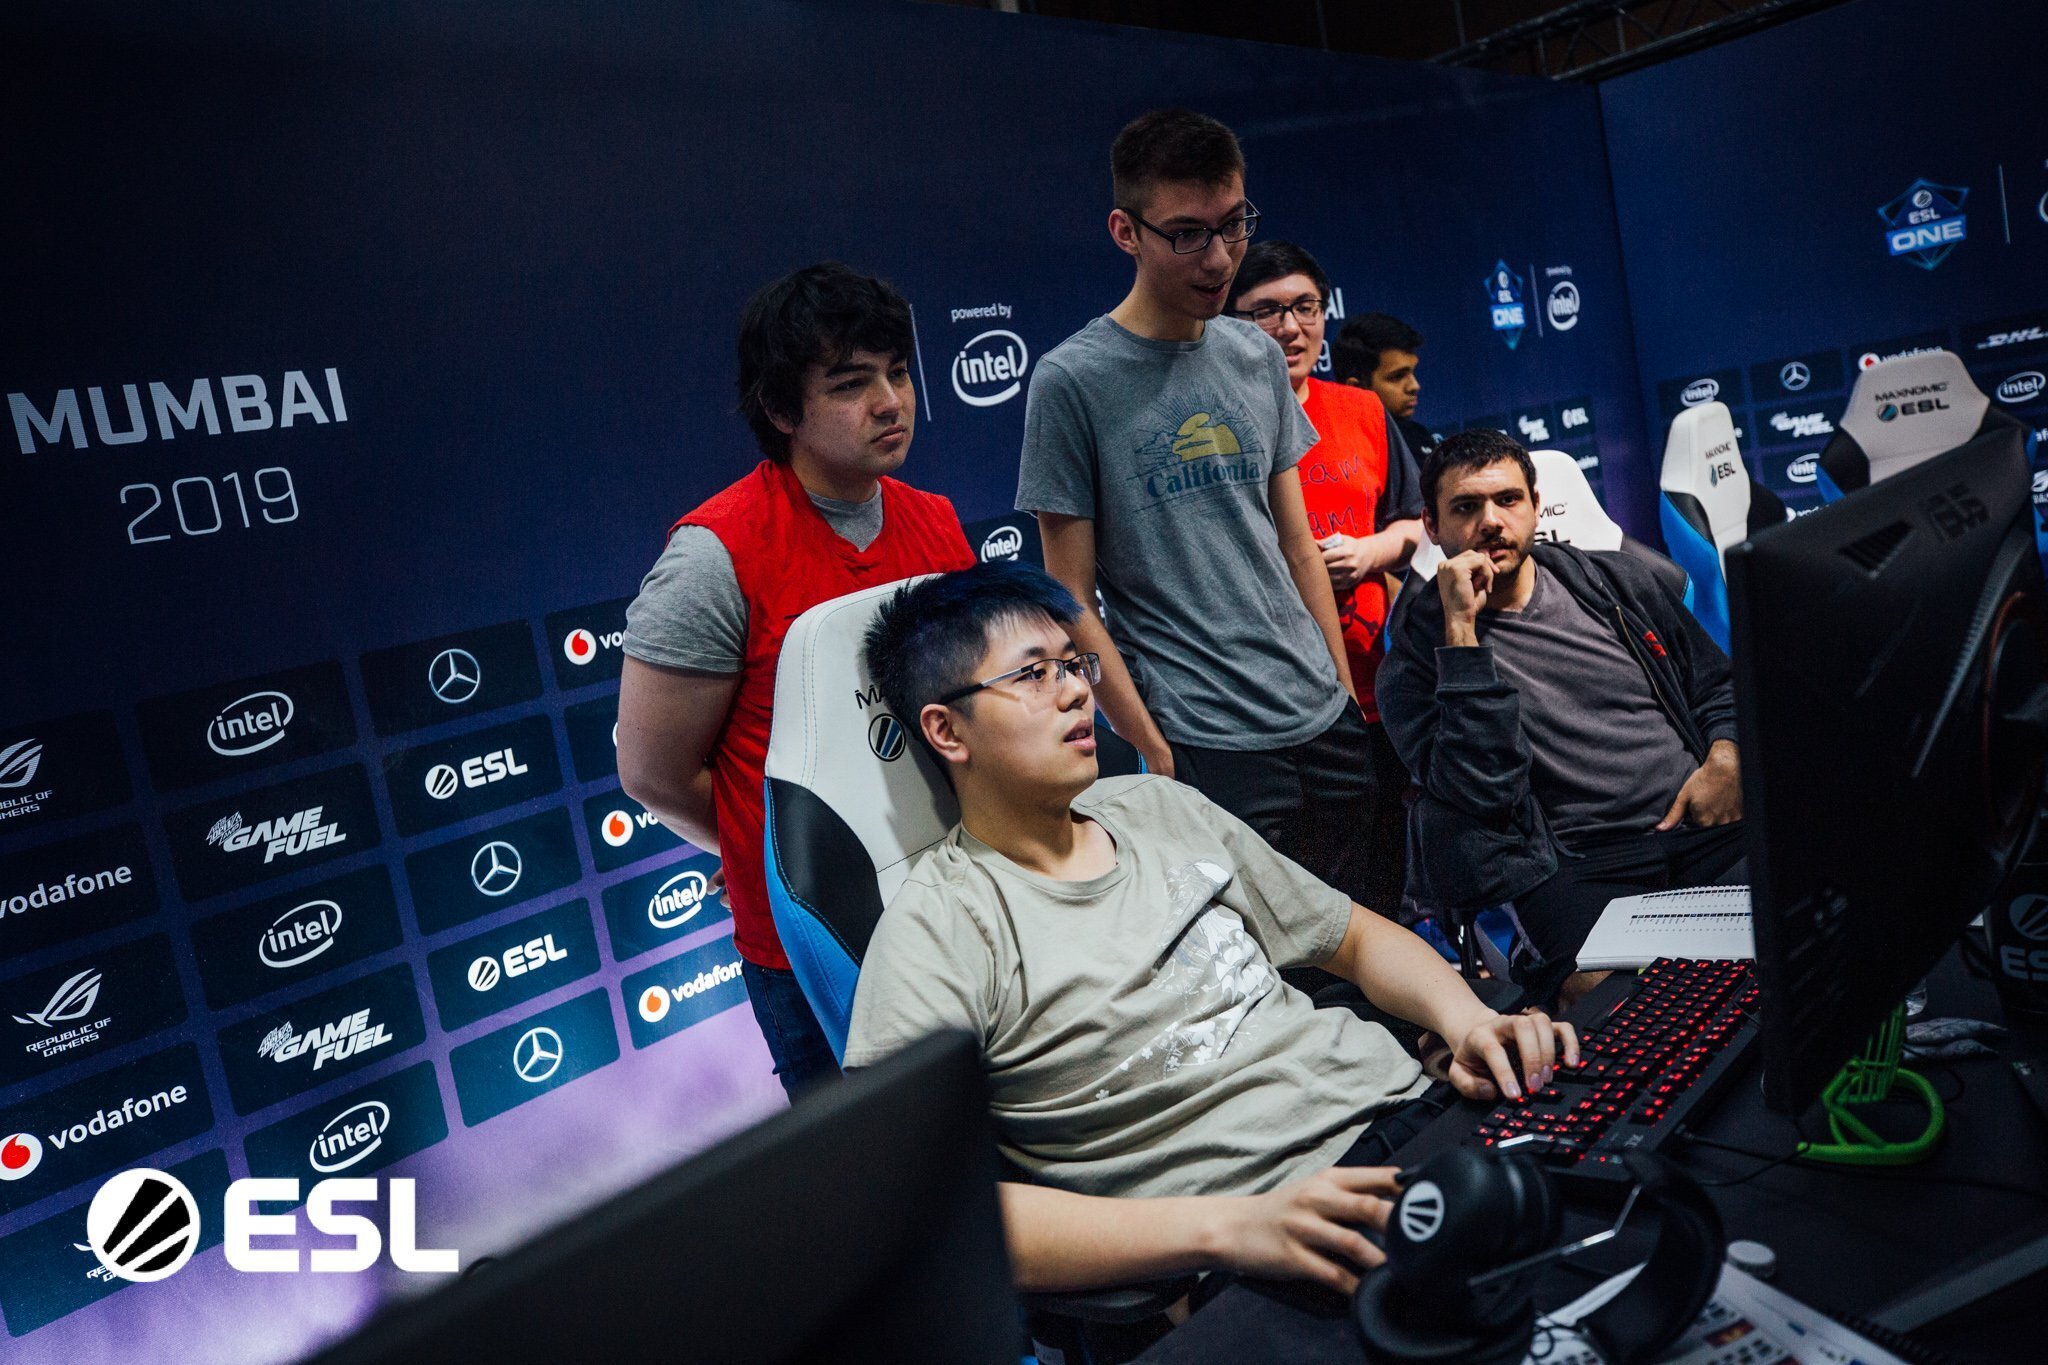 Currently, Gunnar is competing with Team Team at ESL One Mumbai 2019. (Photo courtesy of ESL One)